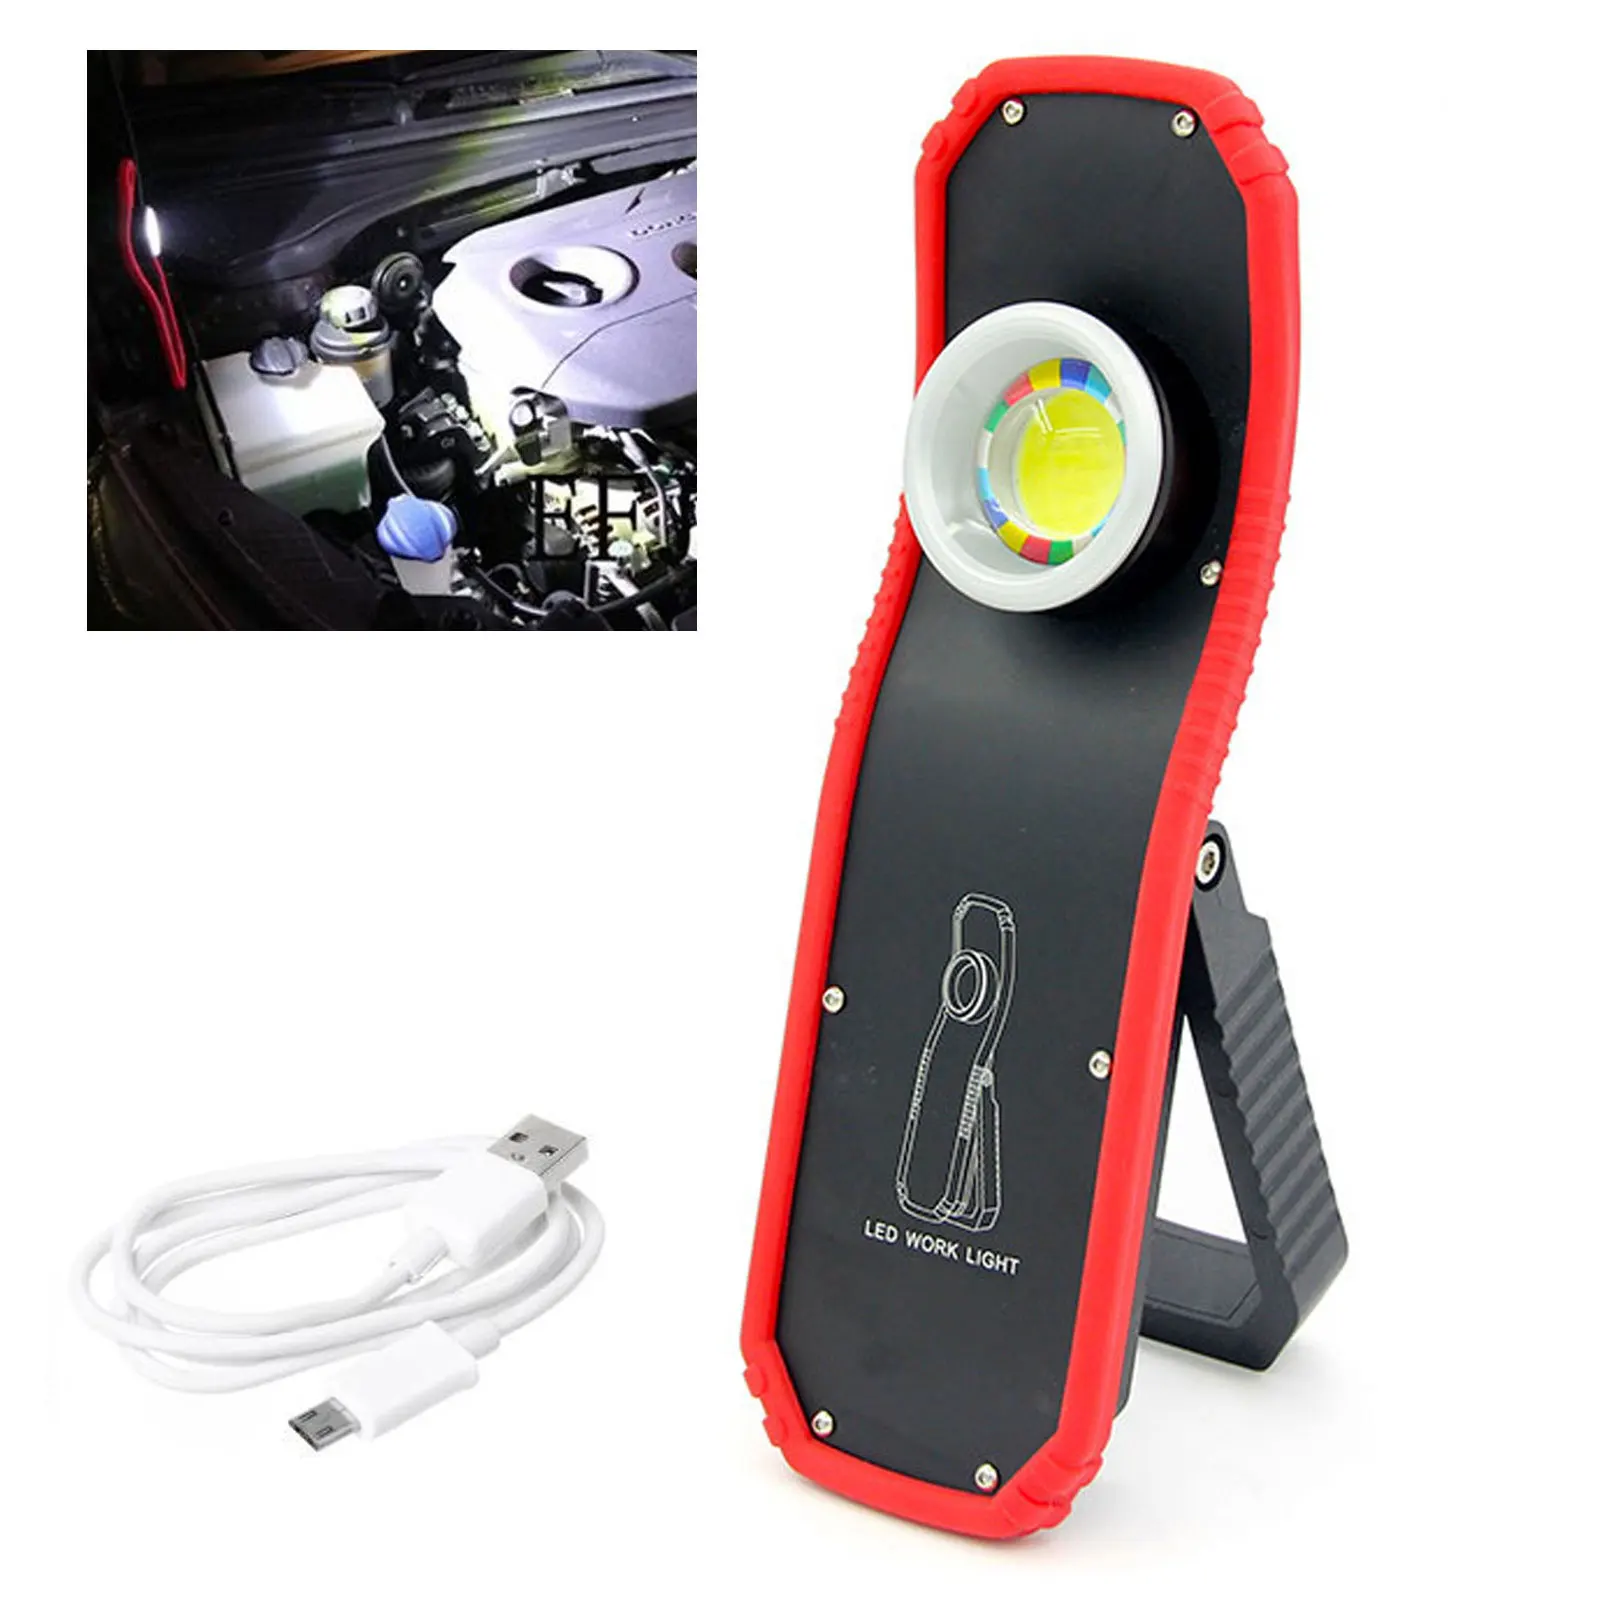 

LED Inspection Worklight Stepless Dimming Magnetic COB 100/400 Lumens Rechargeable Portable Hook Lamp For Auto Detailing